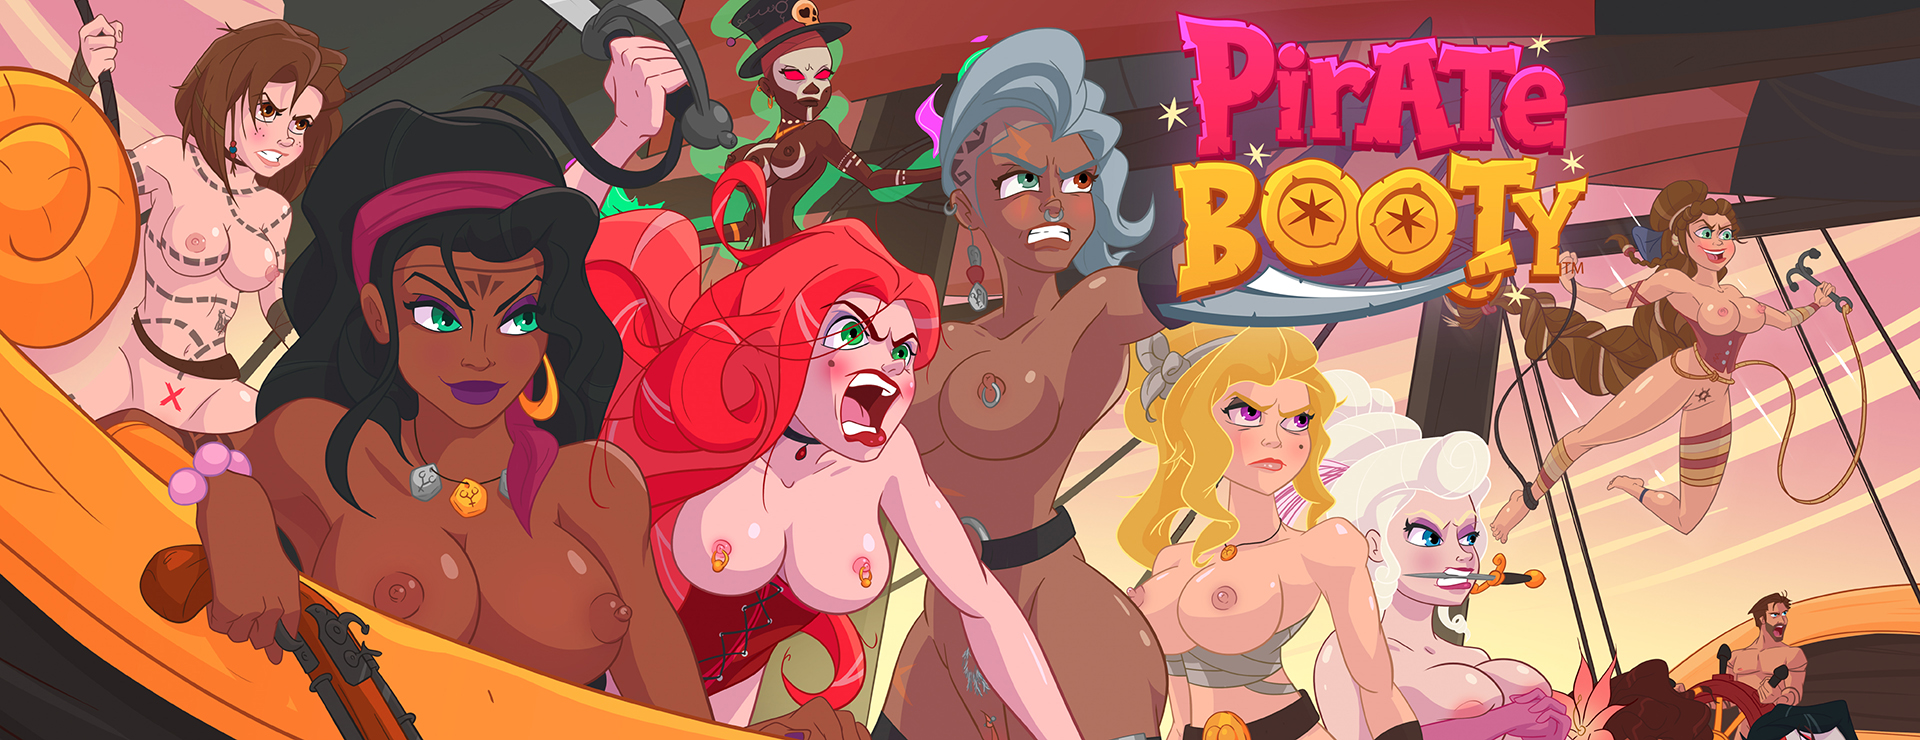 Pirate Booty - Casual Game